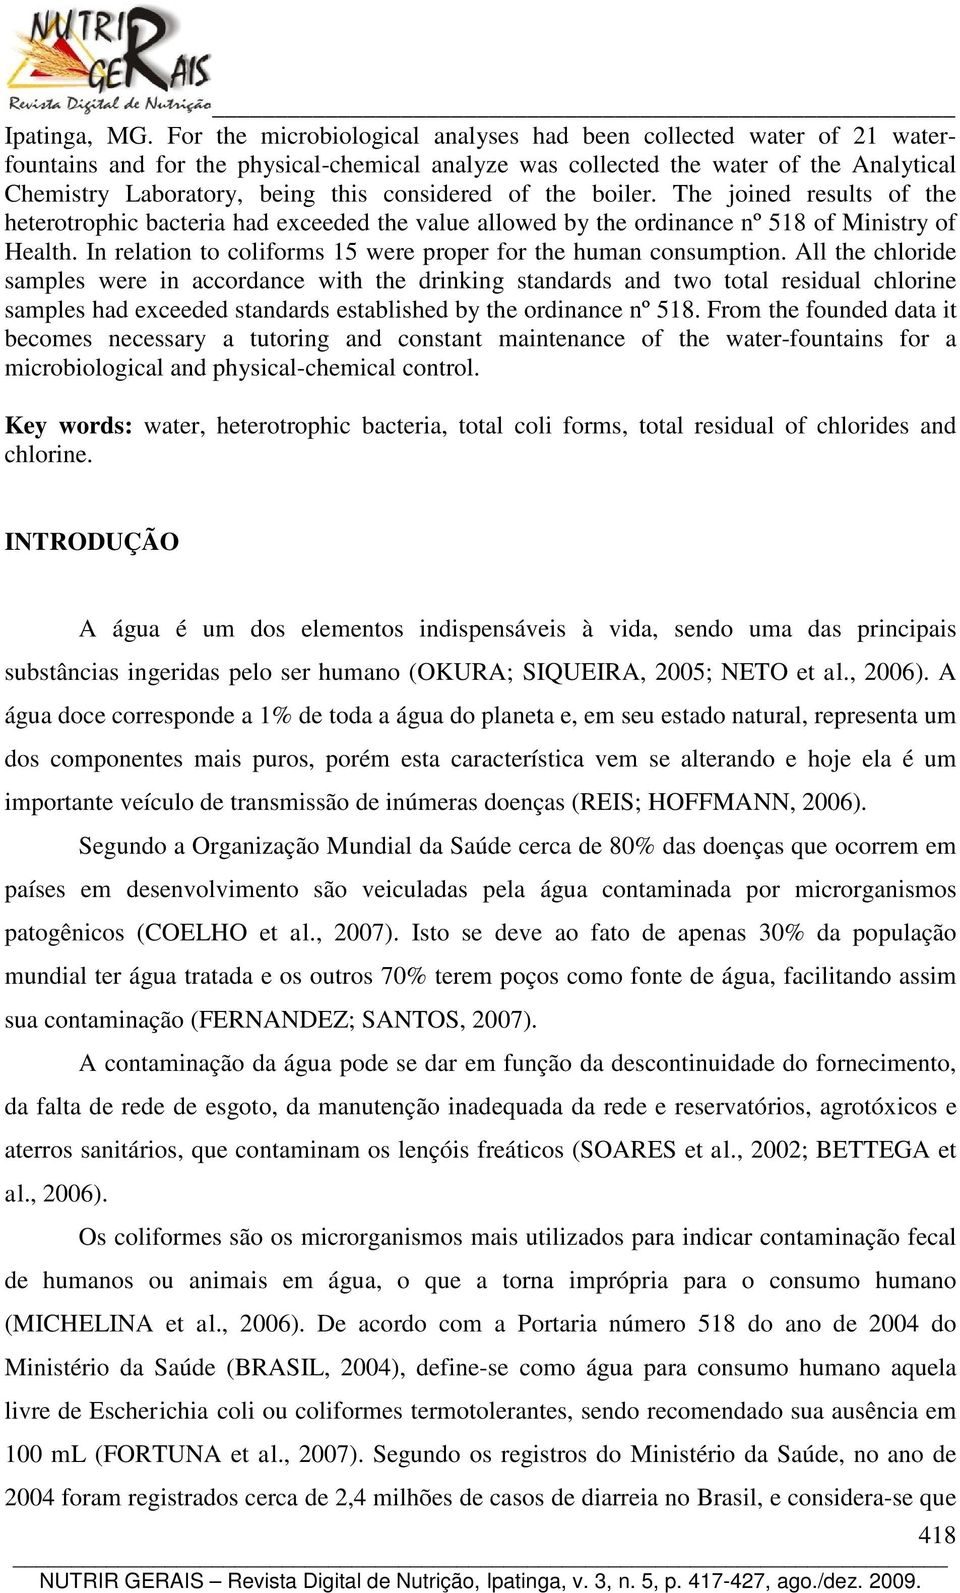 considered of the boiler. The joined results of the heterotrophic bacteria had exceeded the value allowed by the ordinance nº 518 of Ministry of Health.